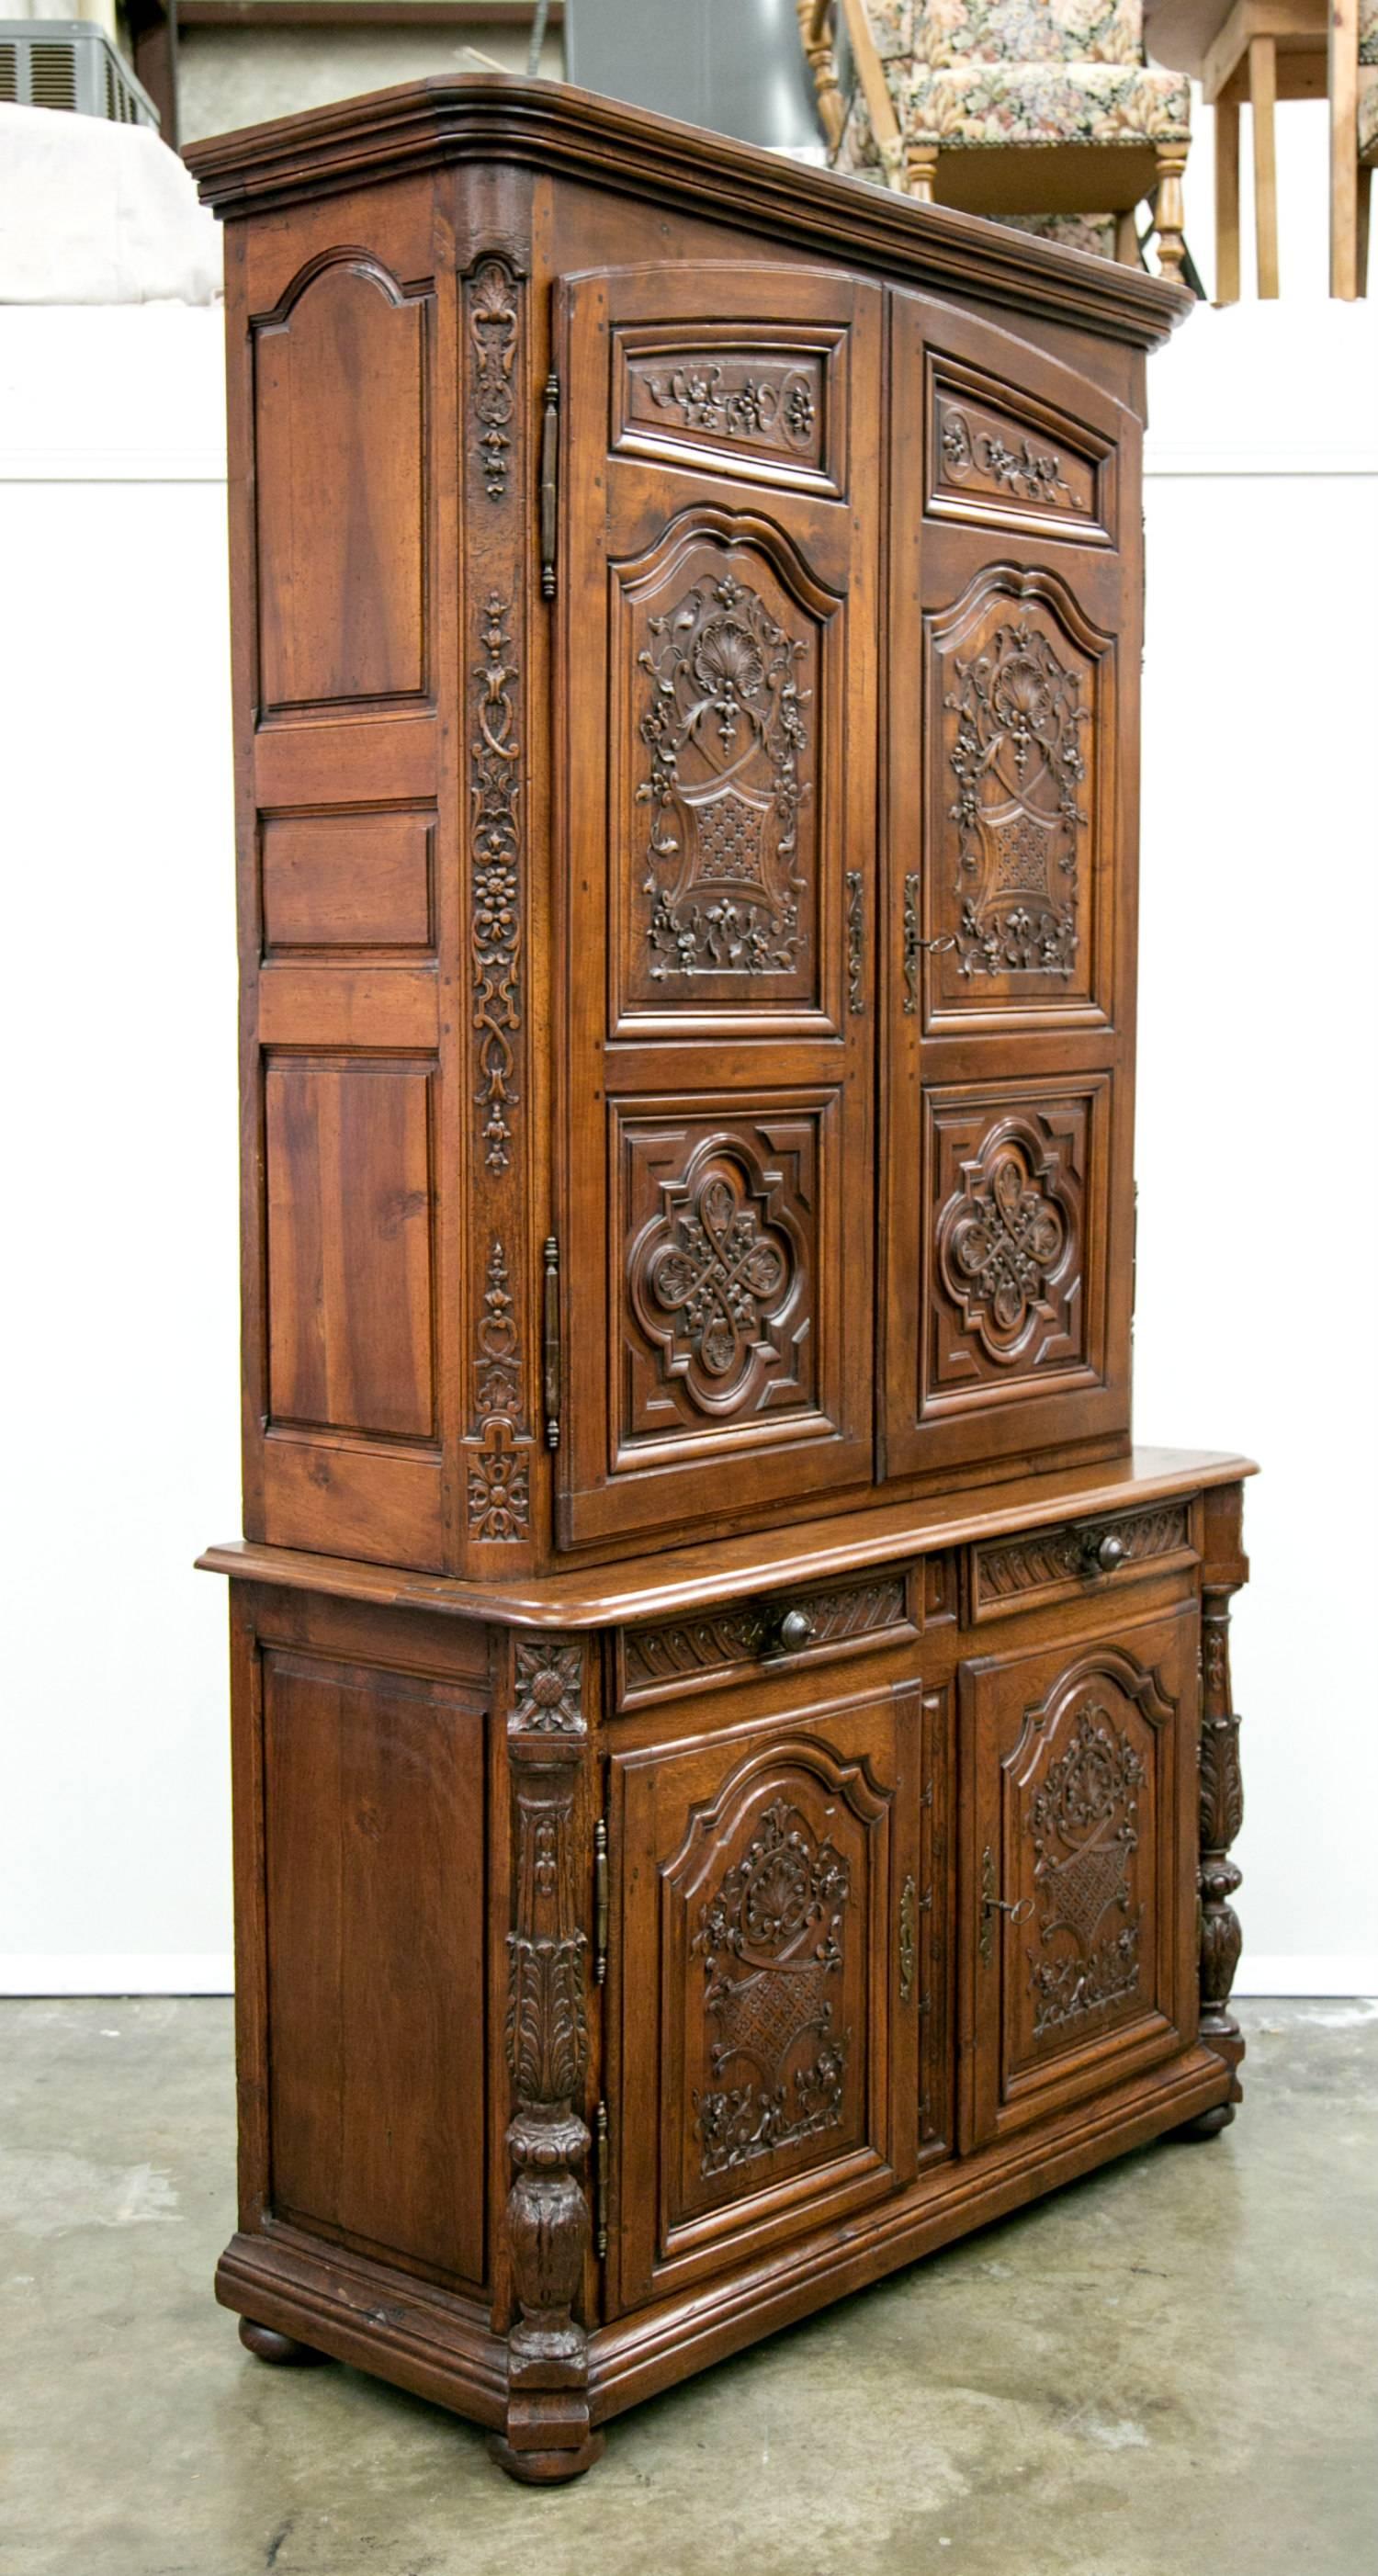 Charming country French Louis XIV period buffet a deux corps having an upper cabinet sculpted from select French walnut with triple paneled doors that open to reveal three shelves, sitting atop a lower buffet of dense, old-growth quarter-sawn oak